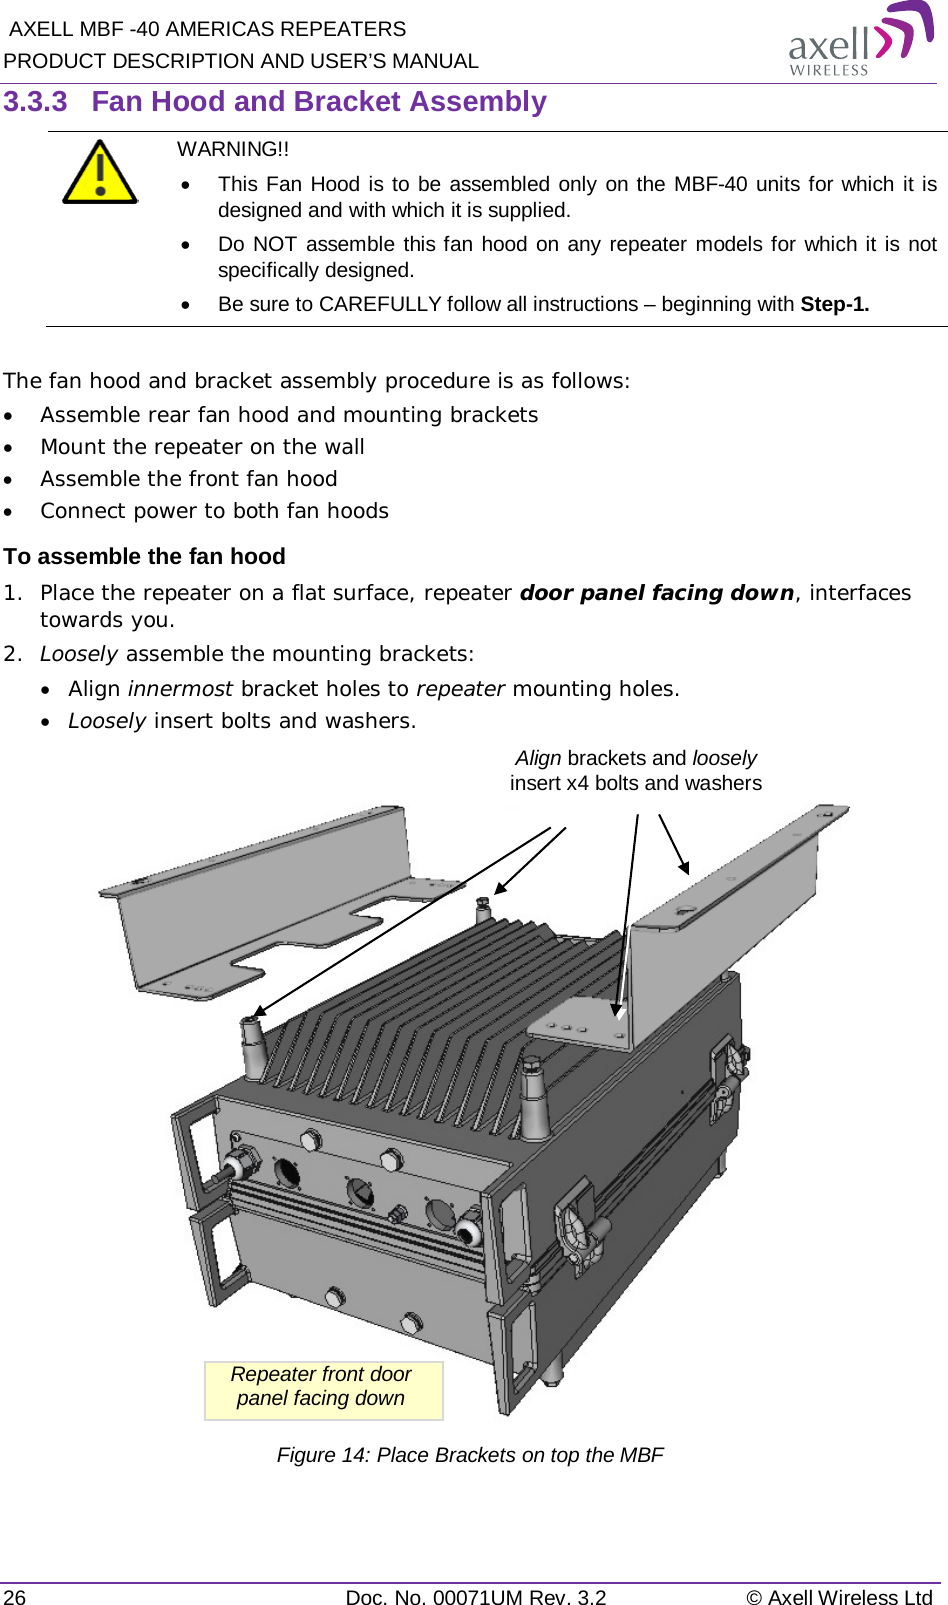  AXELL MBF -40 AMERICAS REPEATERS PRODUCT DESCRIPTION AND USER’S MANUAL 26 Doc. No. 00071UM Rev. 3.2 © Axell Wireless Ltd 3.3.3  Fan Hood and Bracket Assembly  WARNING!!  • This Fan Hood is to be assembled only on the MBF-40 units for which it is designed and with which it is supplied. • Do NOT assemble this fan hood on any repeater models for which it is not specifically designed. • Be sure to CAREFULLY follow all instructions – beginning with Step-1.  The fan hood and bracket assembly procedure is as follows: • Assemble rear fan hood and mounting brackets • Mount the repeater on the wall • Assemble the front fan hood • Connect power to both fan hoods  To assemble the fan hood 1.  Place the repeater on a flat surface, repeater door panel facing down, interfaces towards you.  2.  Loosely assemble the mounting brackets: • Align innermost bracket holes to repeater mounting holes. • Loosely insert bolts and washers.   Figure 14: Place Brackets on top the MBF    Repeater front door panel facing down Align brackets and loosely insert x4 bolts and washers 